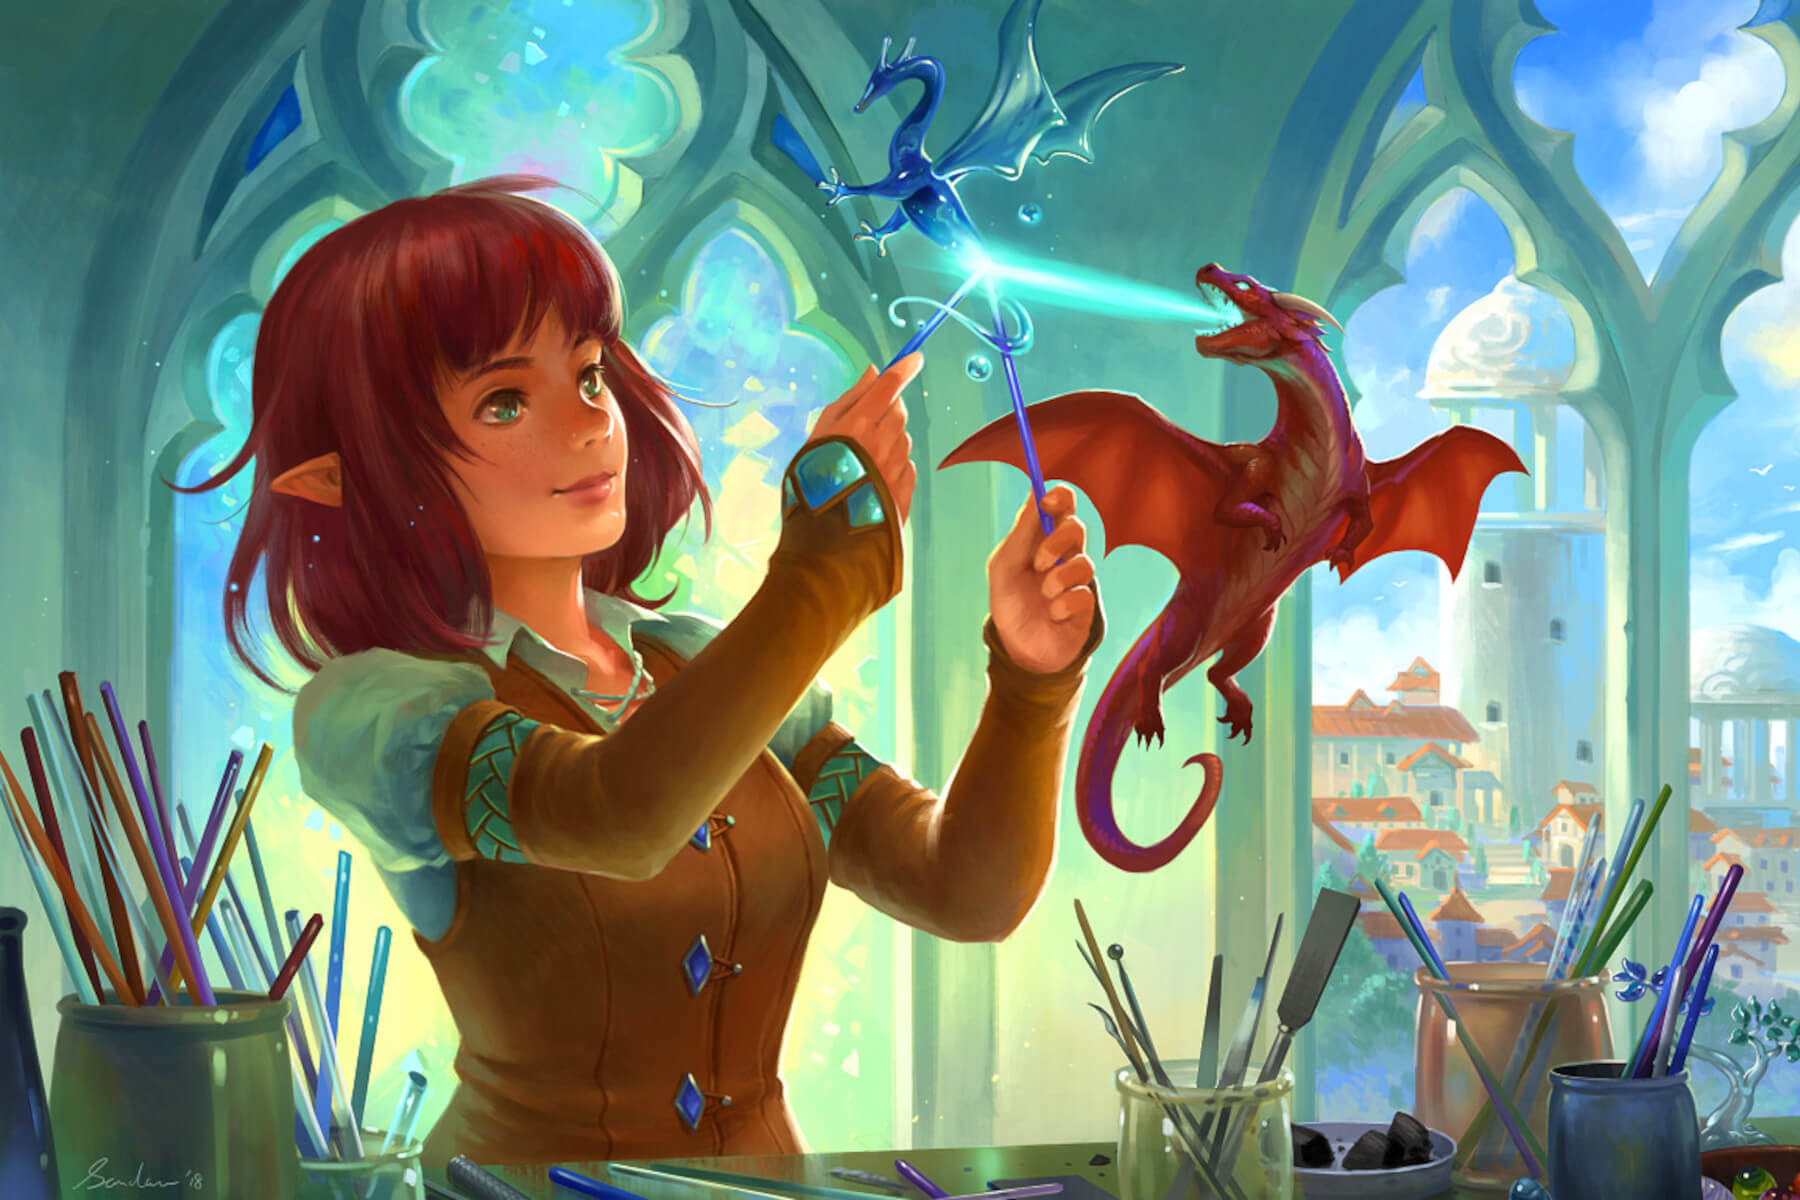 A young elf creates a glass sculpture of a dragon aided by a tiny fire-breathing dragon, by Sandara Tang.